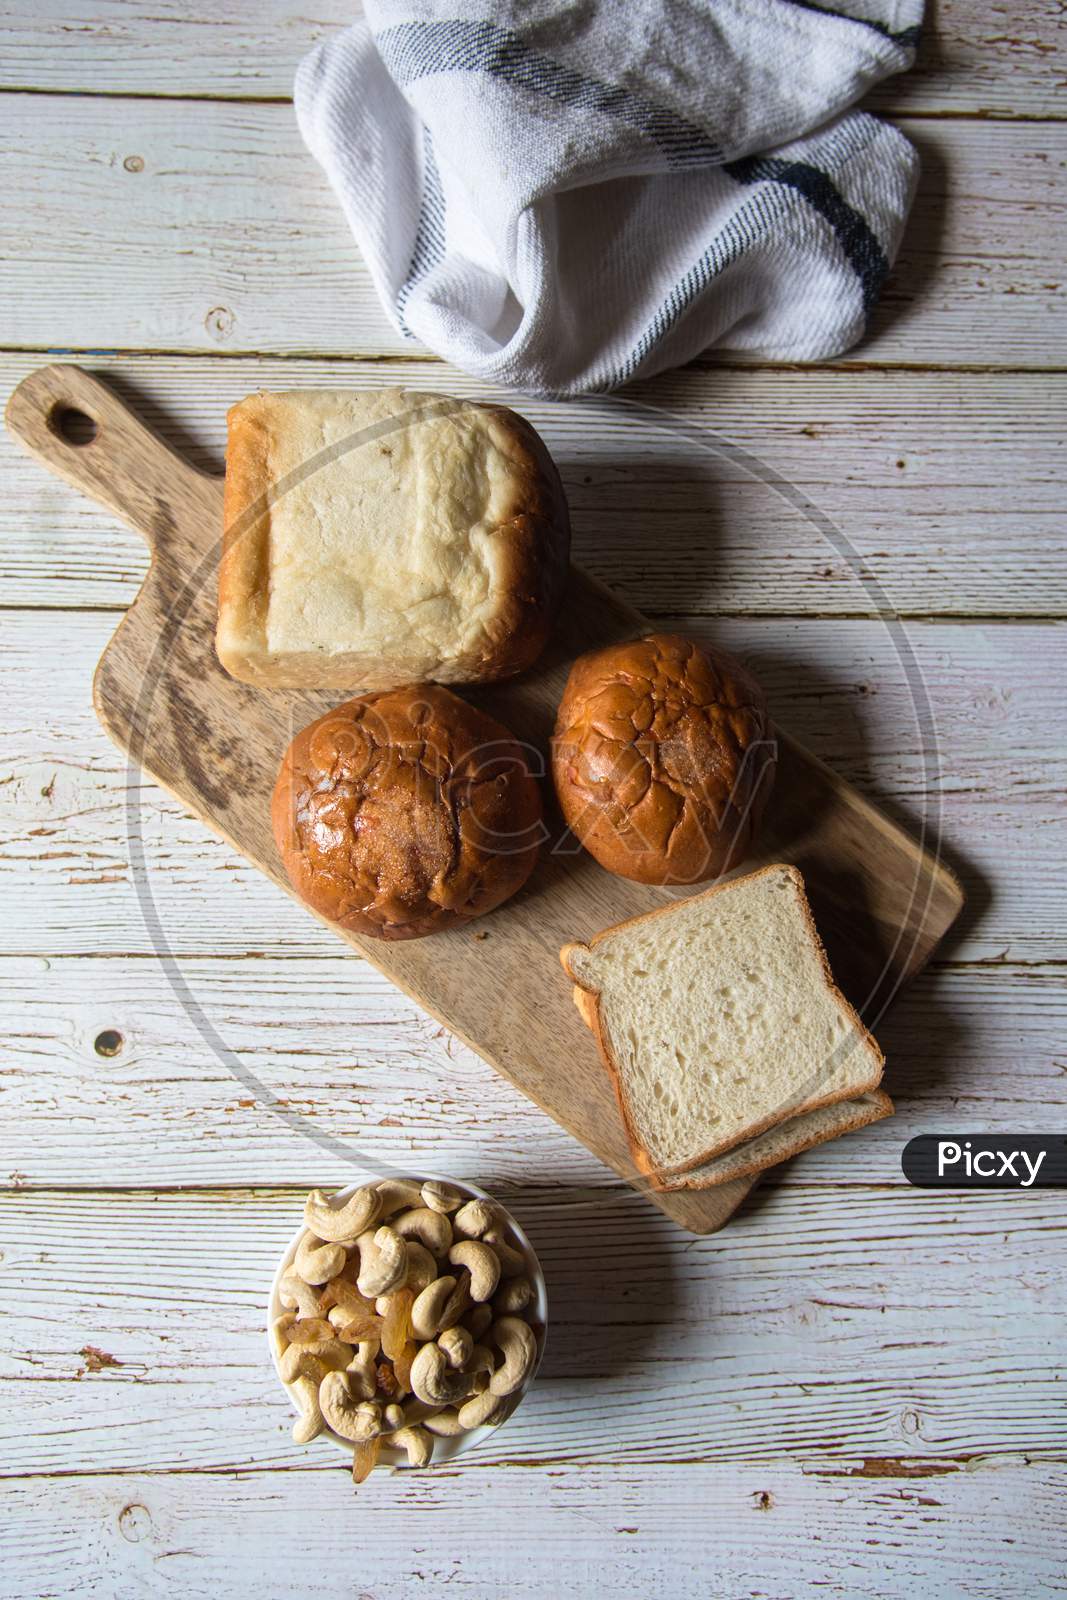 Top view of still life with bread, dry fruits and buns on a wooden platter